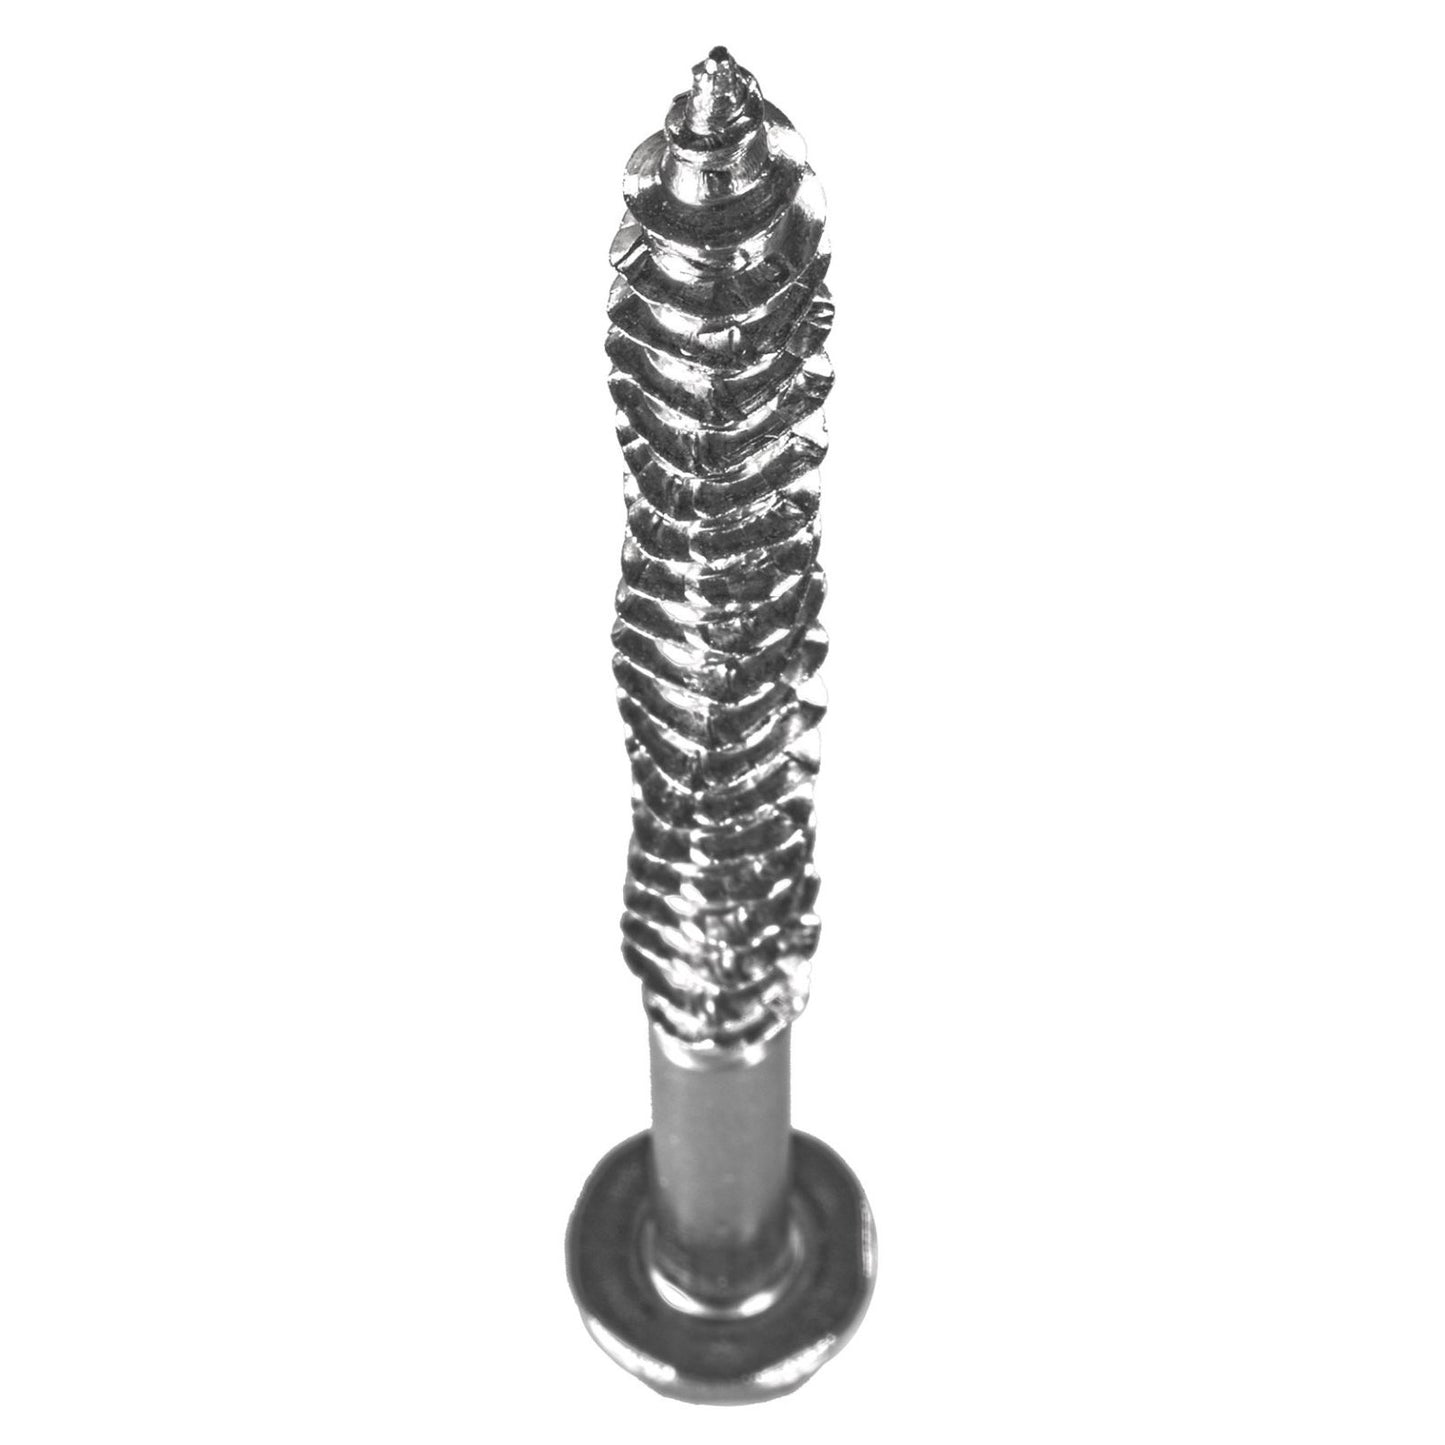 0188 inch x 5 inch StrongTie SDWH TimberHex Screw 316 Stainless Steel Pkg 100 image 1 of 3 image 2 of 3 image 3 of 3